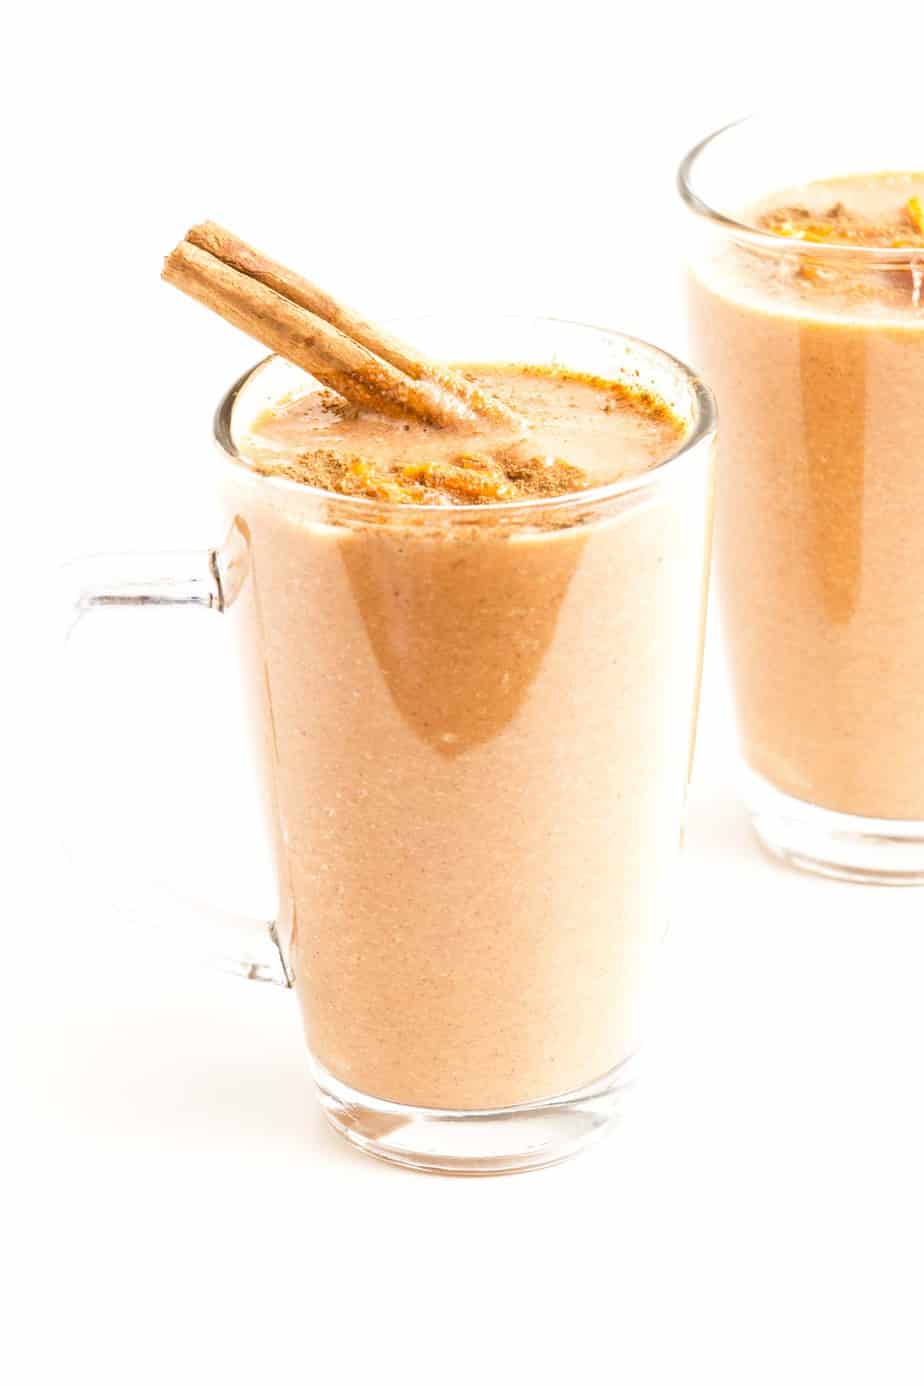 Healthy Carrot Cake Smoothie with a cinnamon quill.